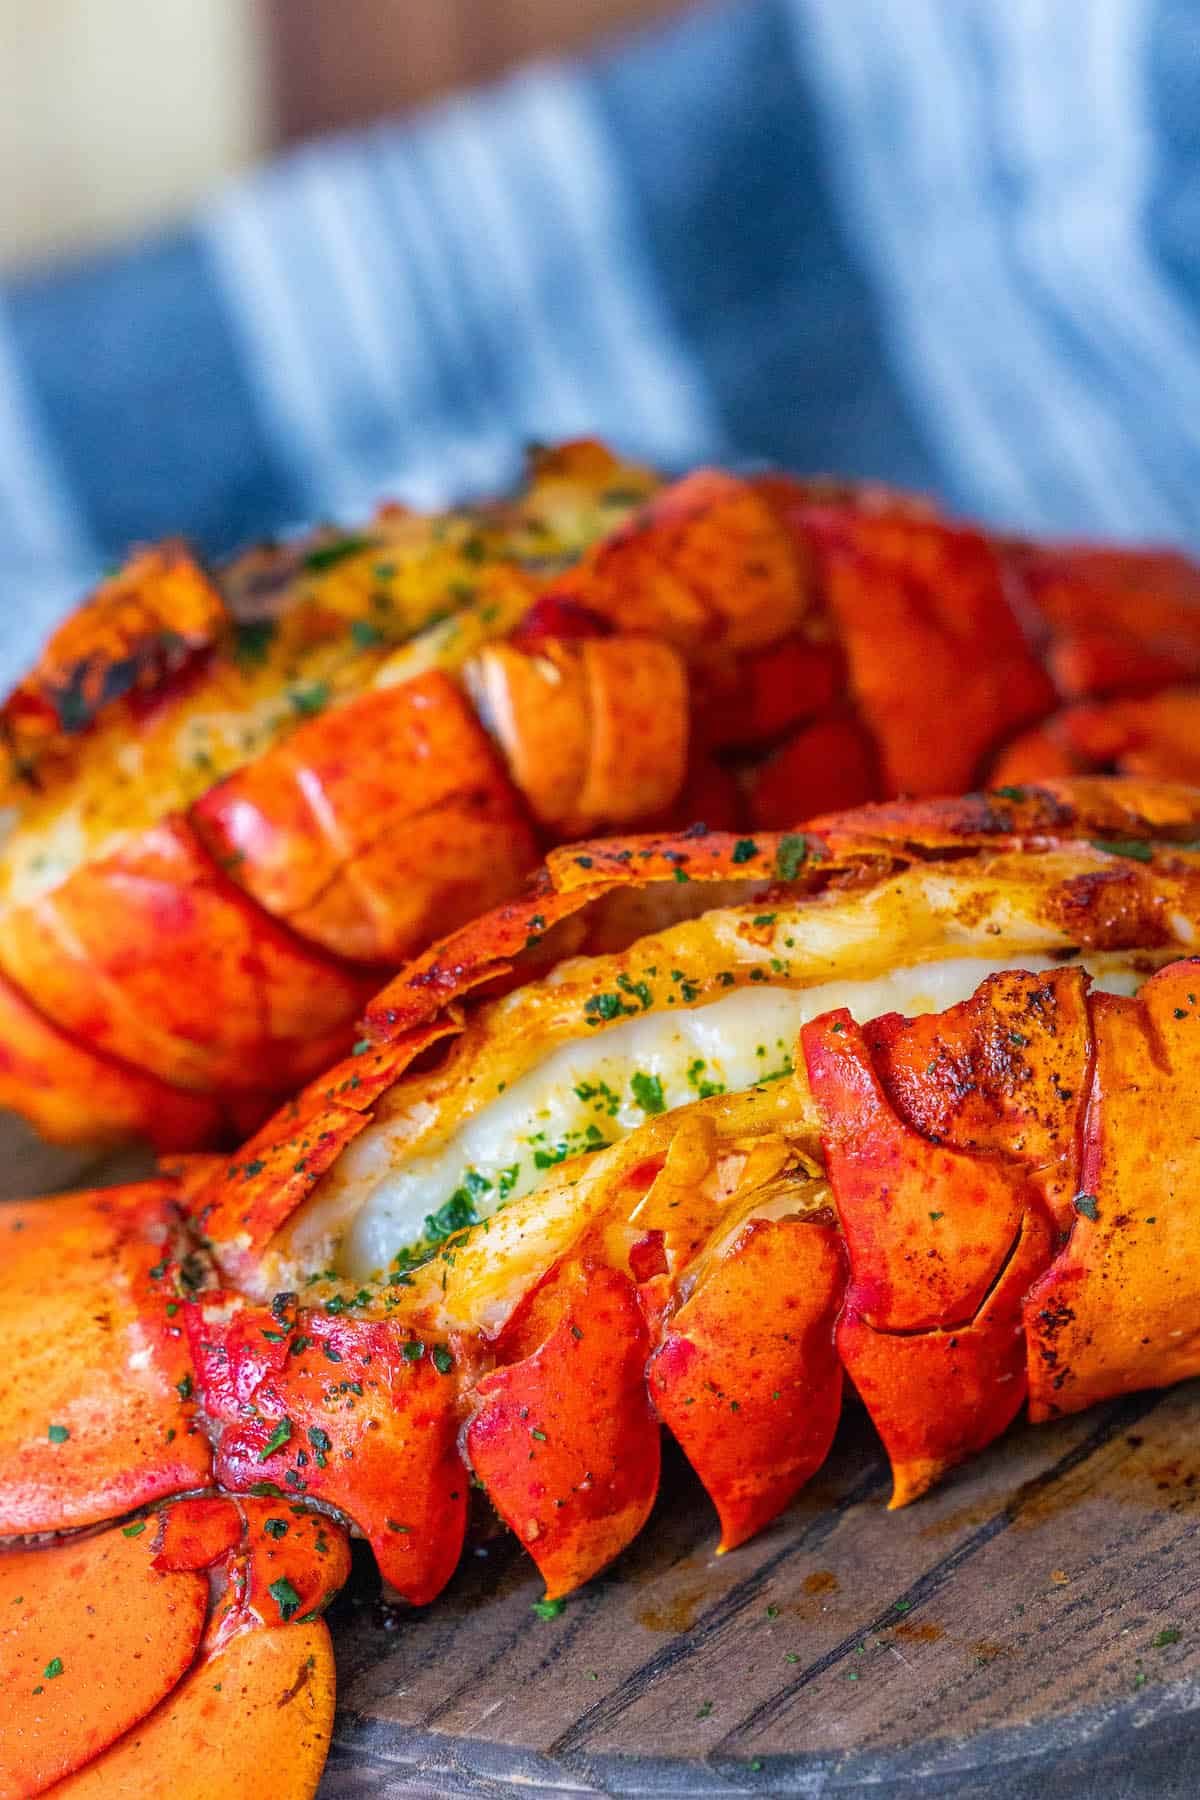 Two delicious lobsters on a beautiful wooden cutting board.